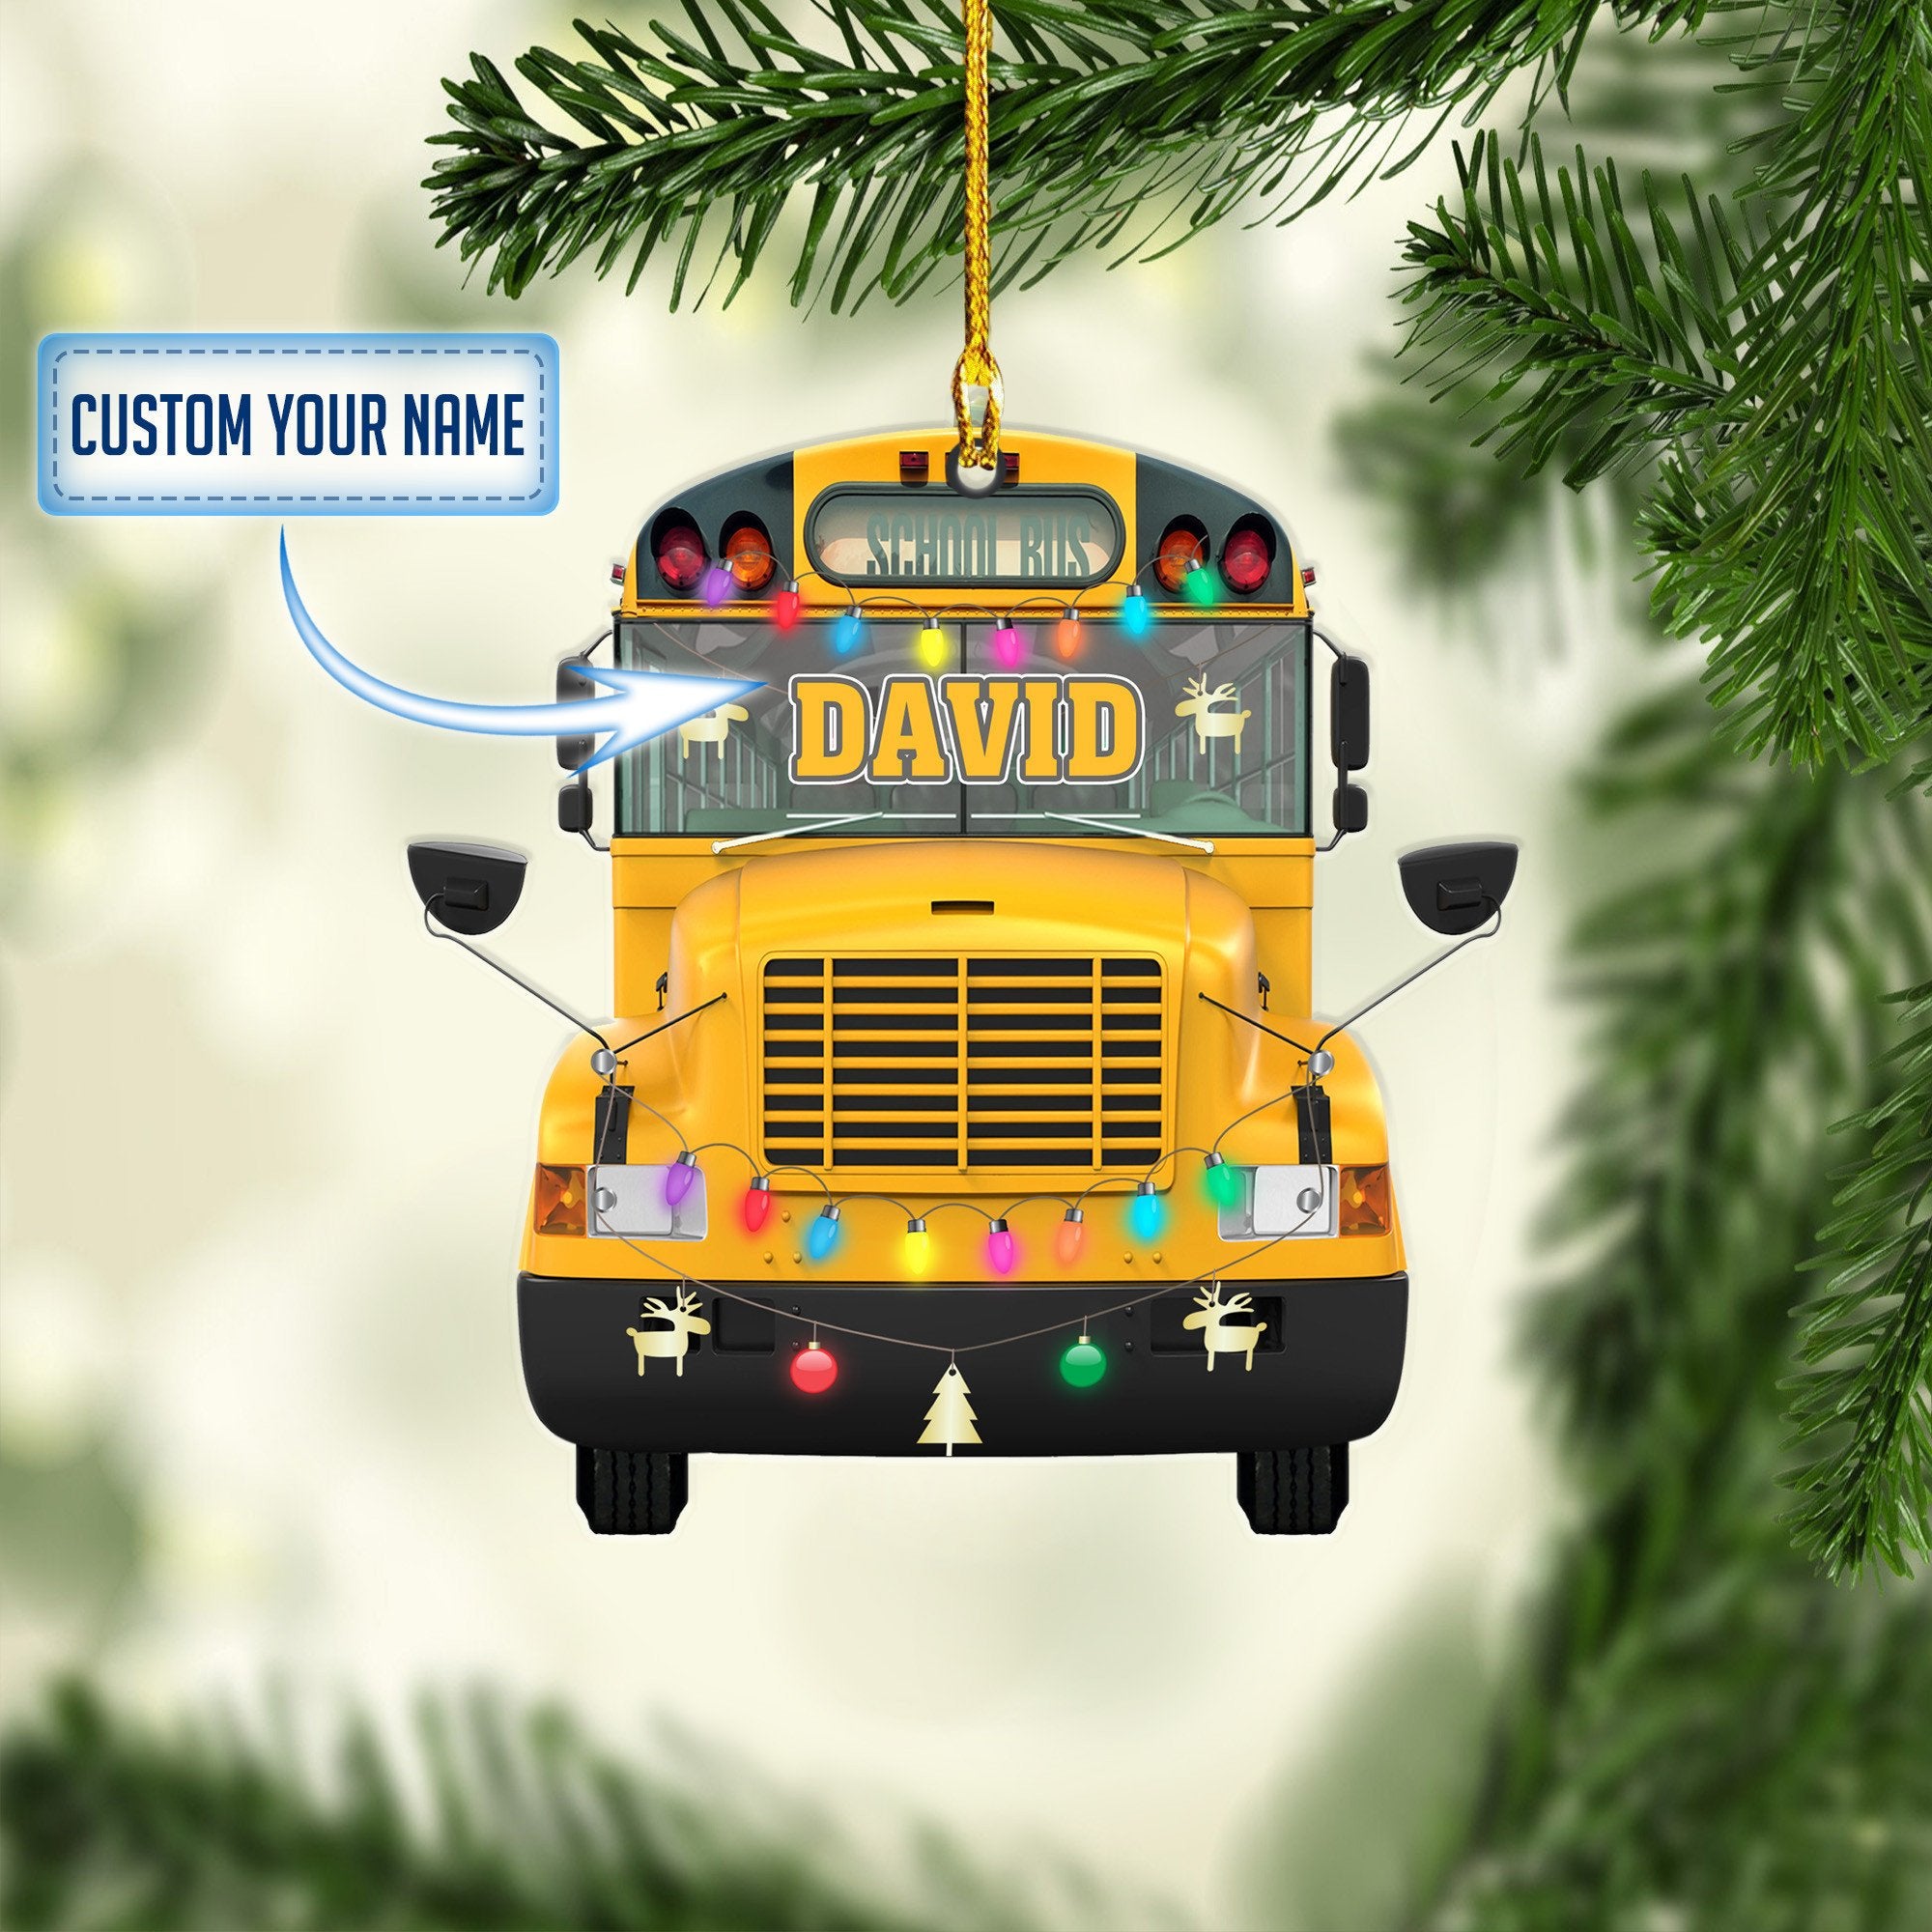 Personalized School Bus Light Christmas Shaped Acrylic Ornaments/ Gift for Men/ Driver Bus Gift